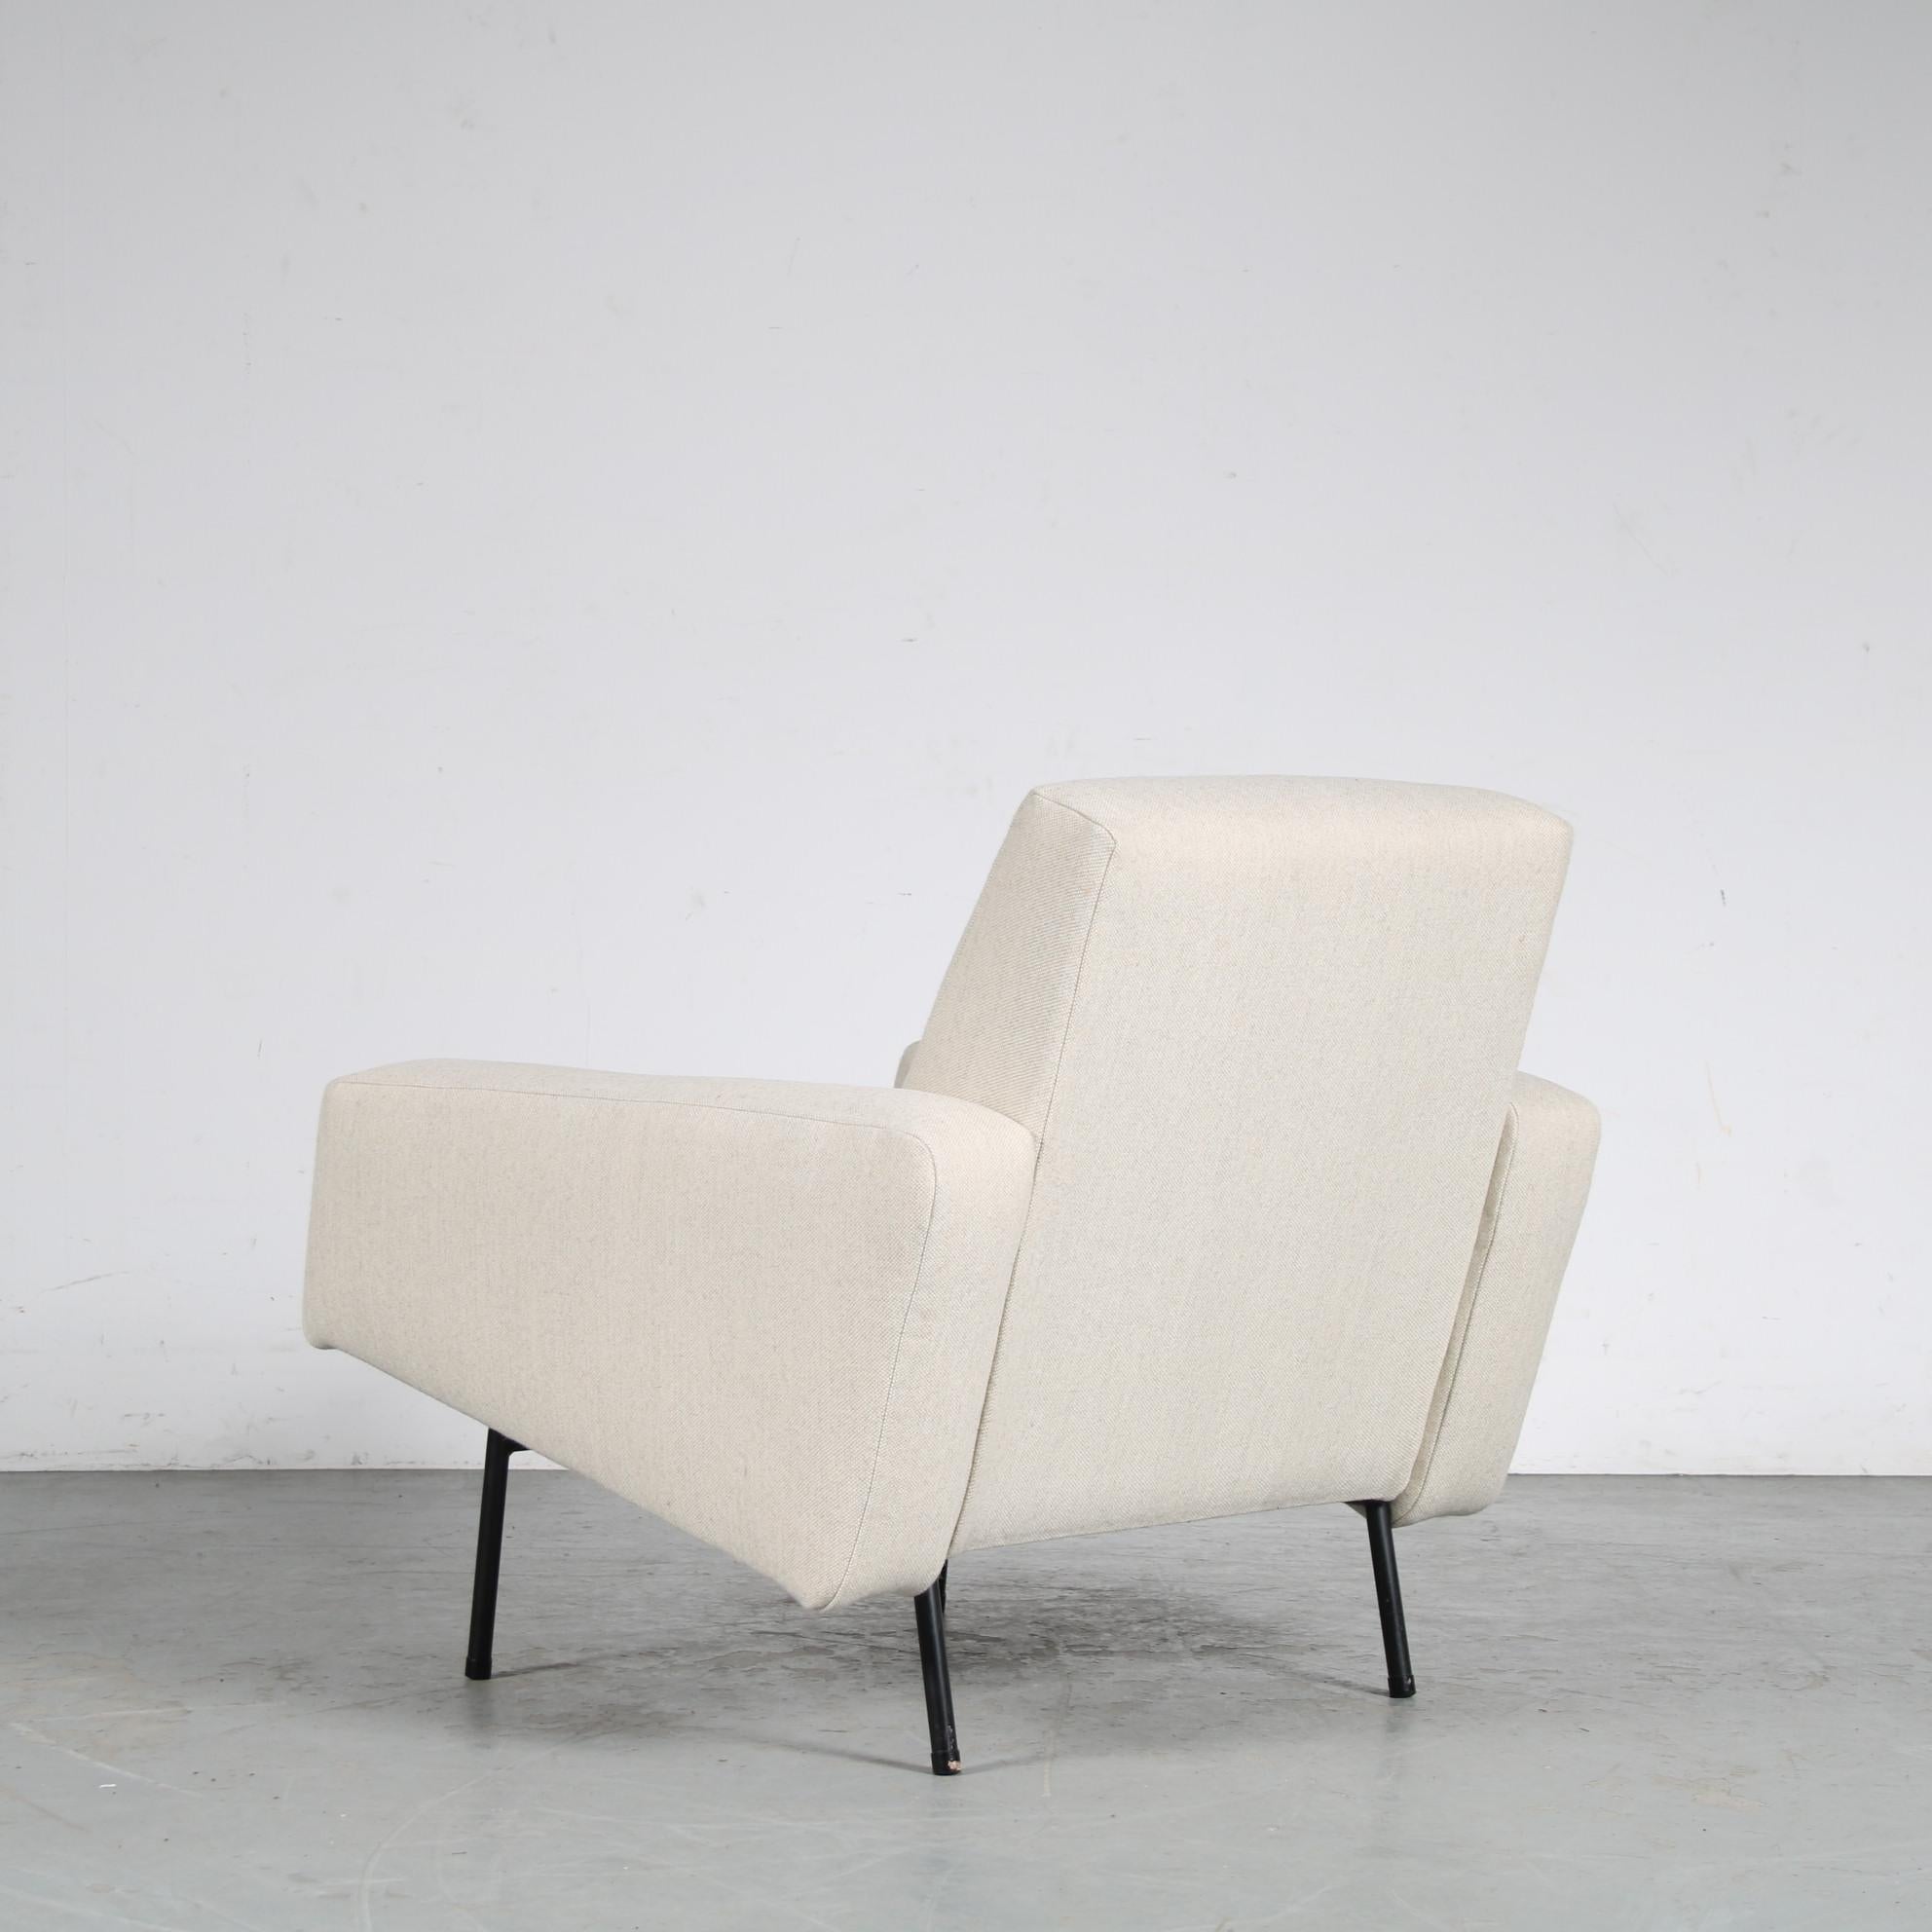 Mid-20th Century Pierre Guariche Lounge Chair for Airborne, France 1960 For Sale